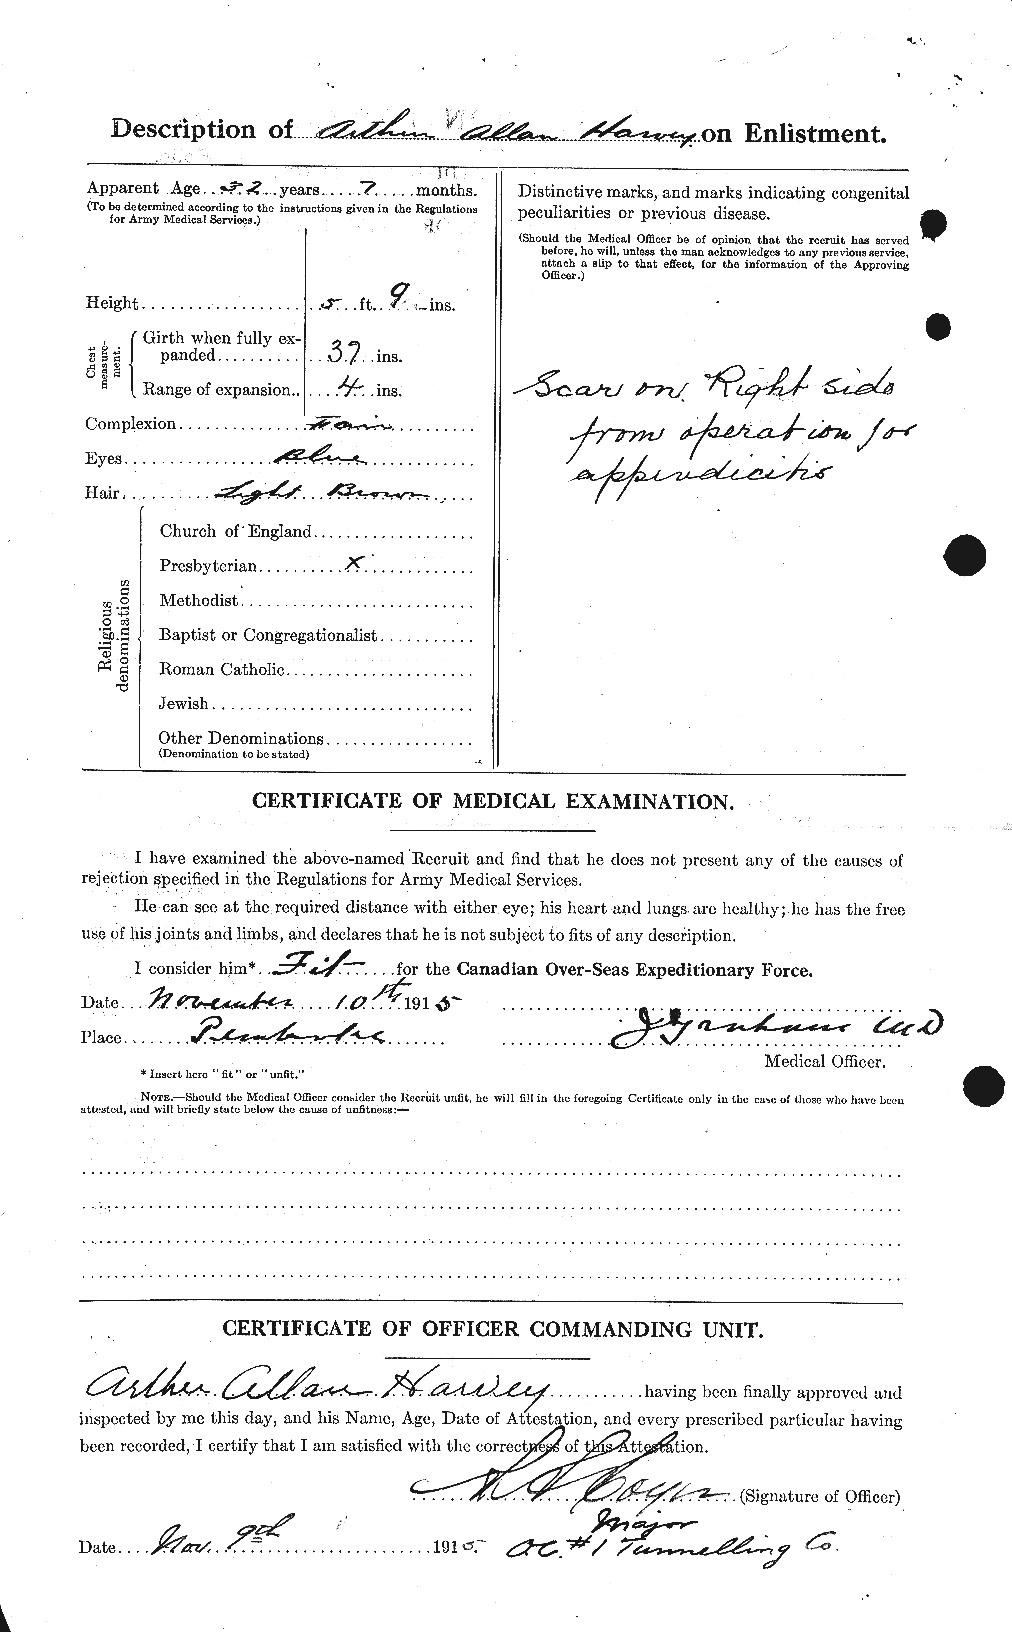 Personnel Records of the First World War - CEF 382522b